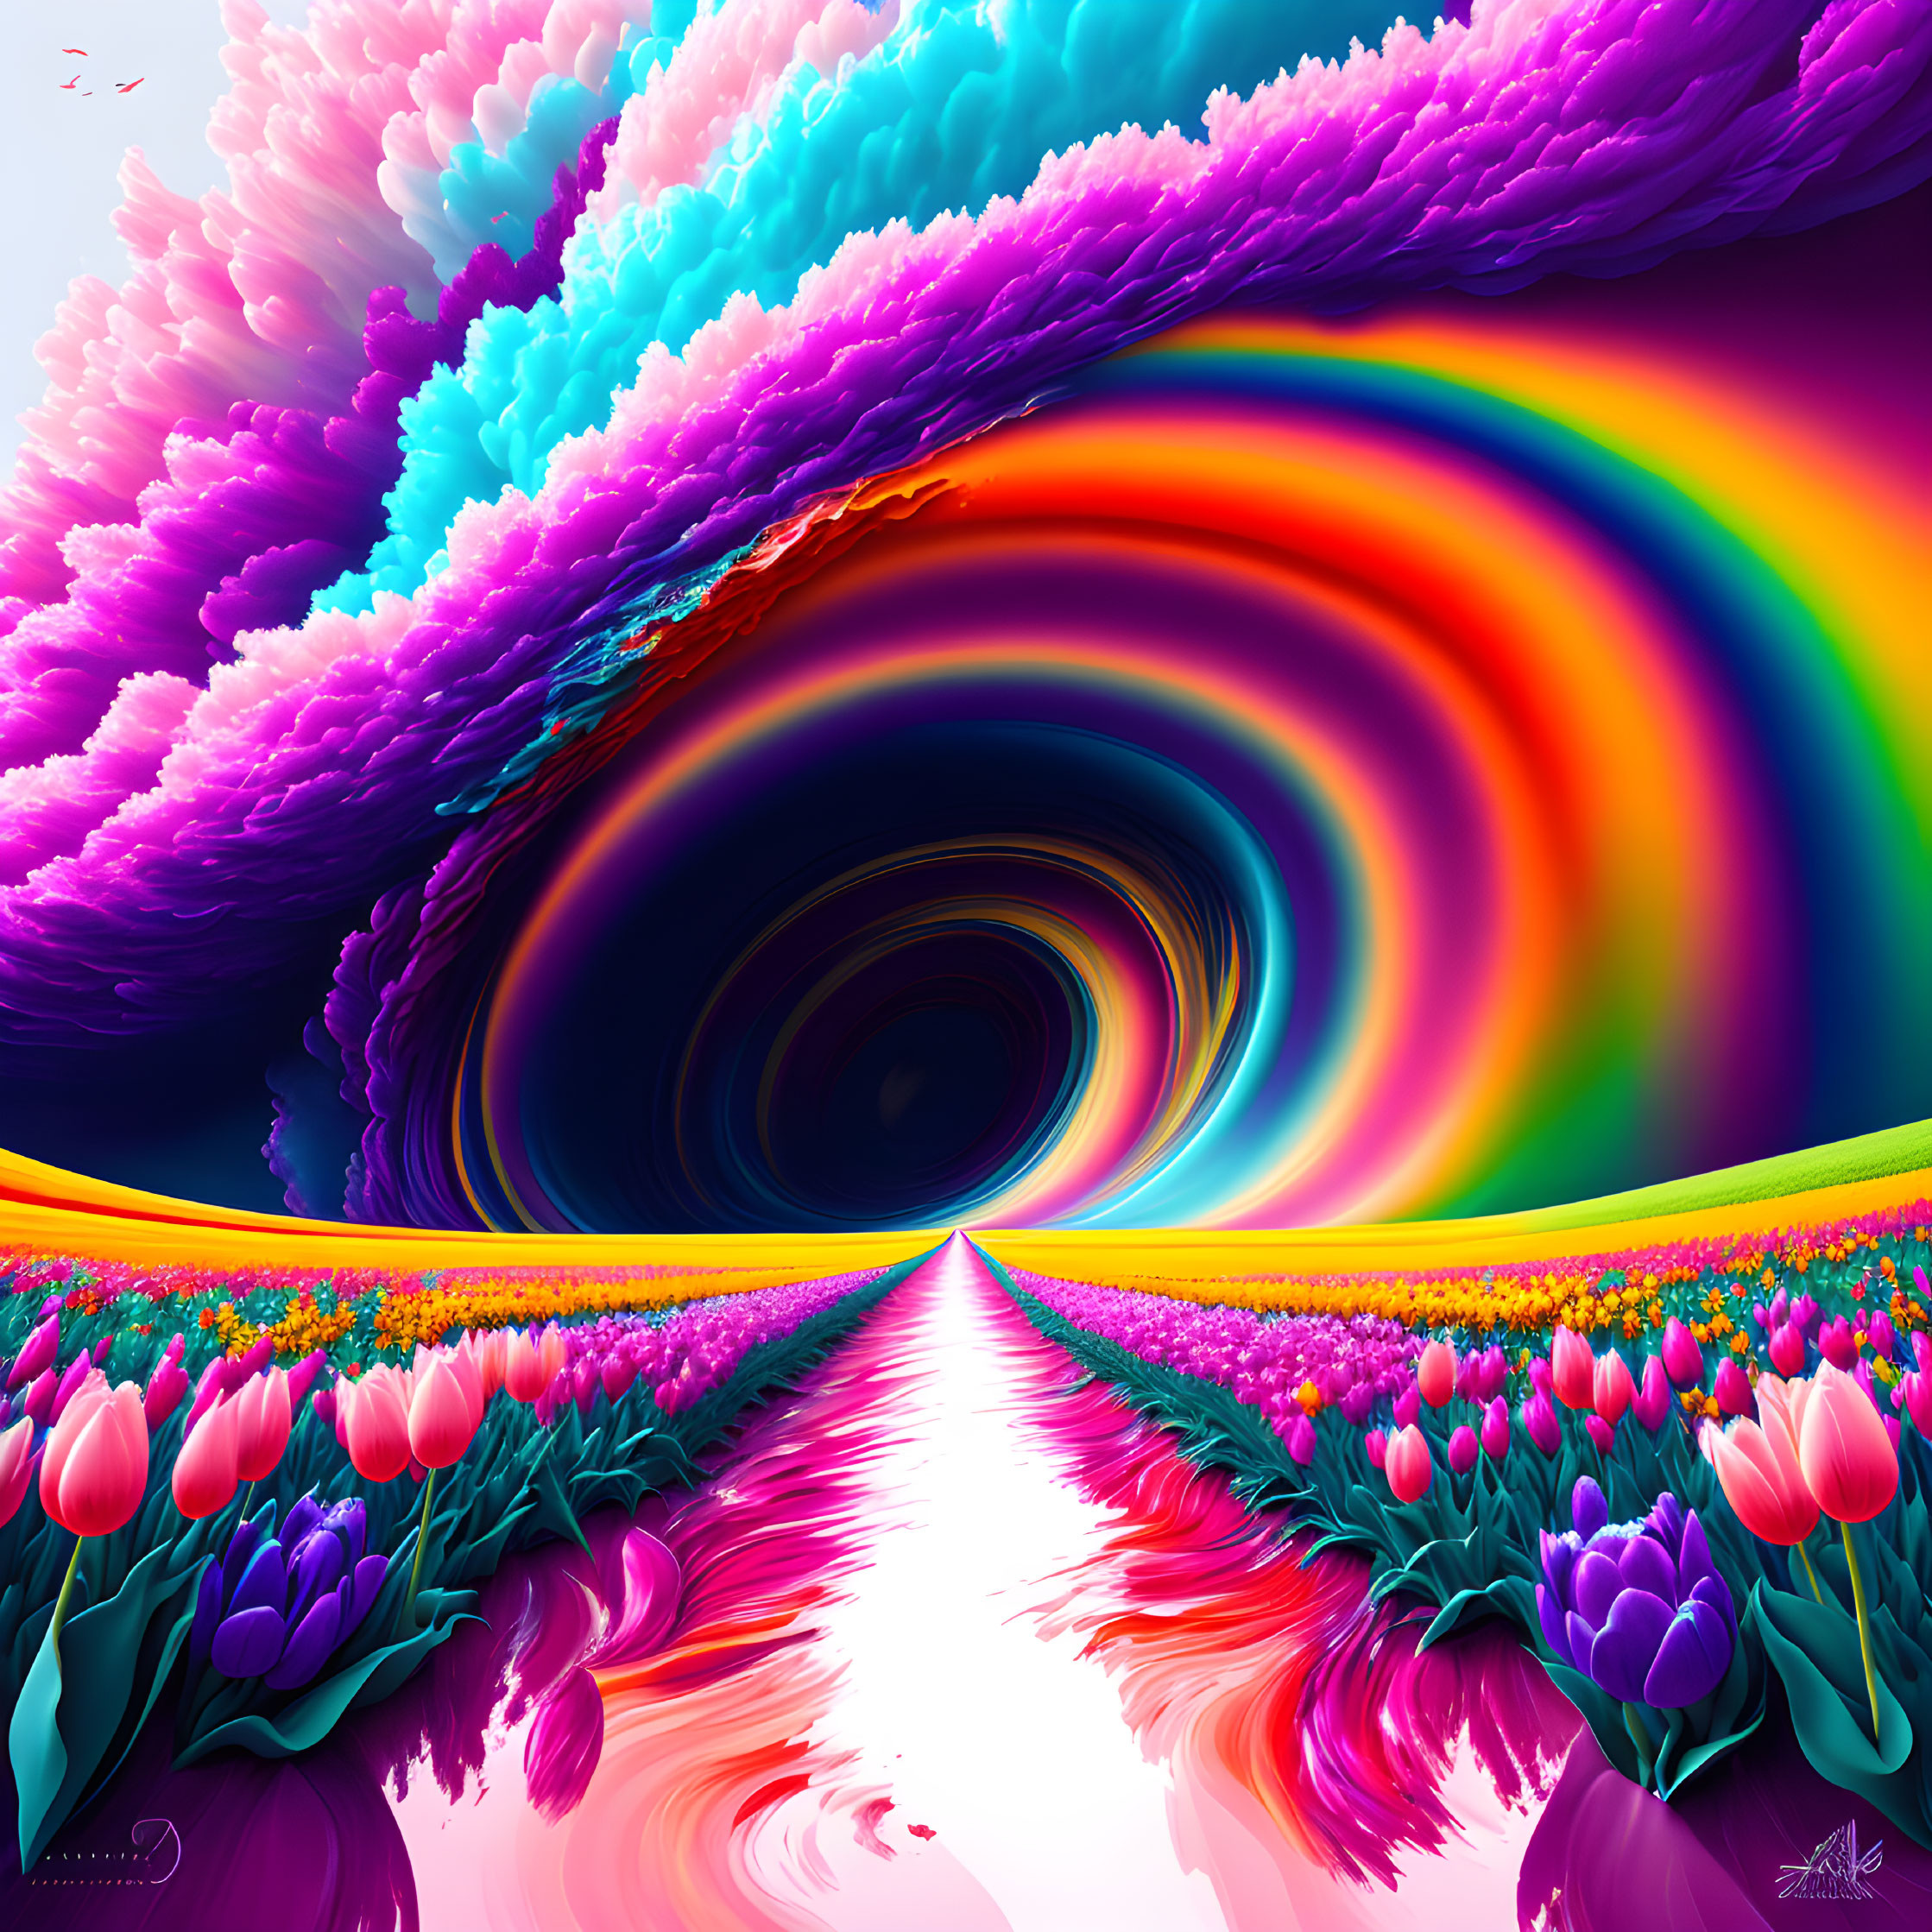 Colorful digital artwork: Rainbow vortex with pink clouds and tulips